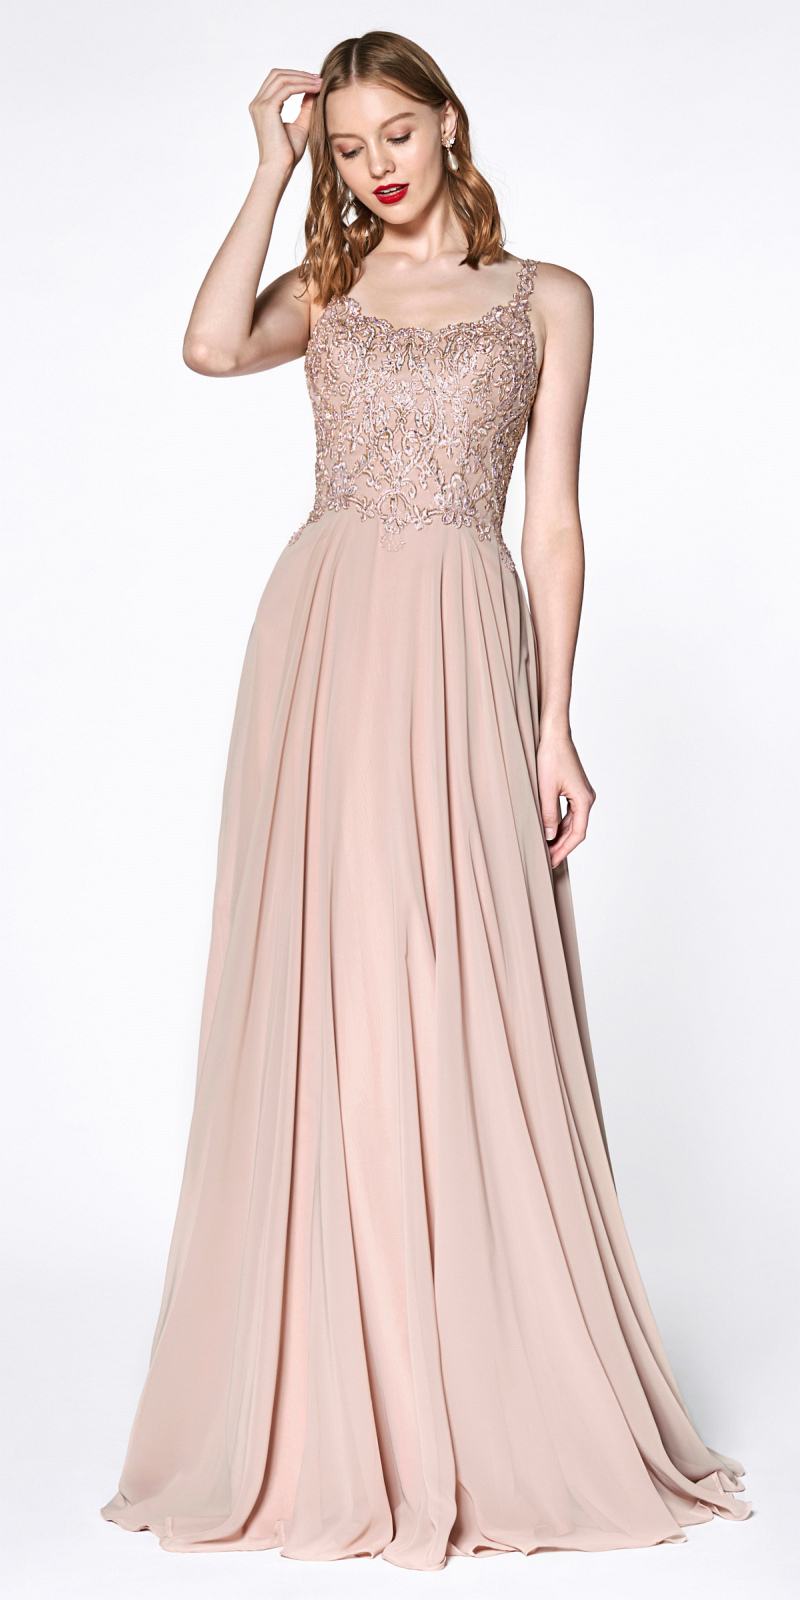 rose gold and black prom dress